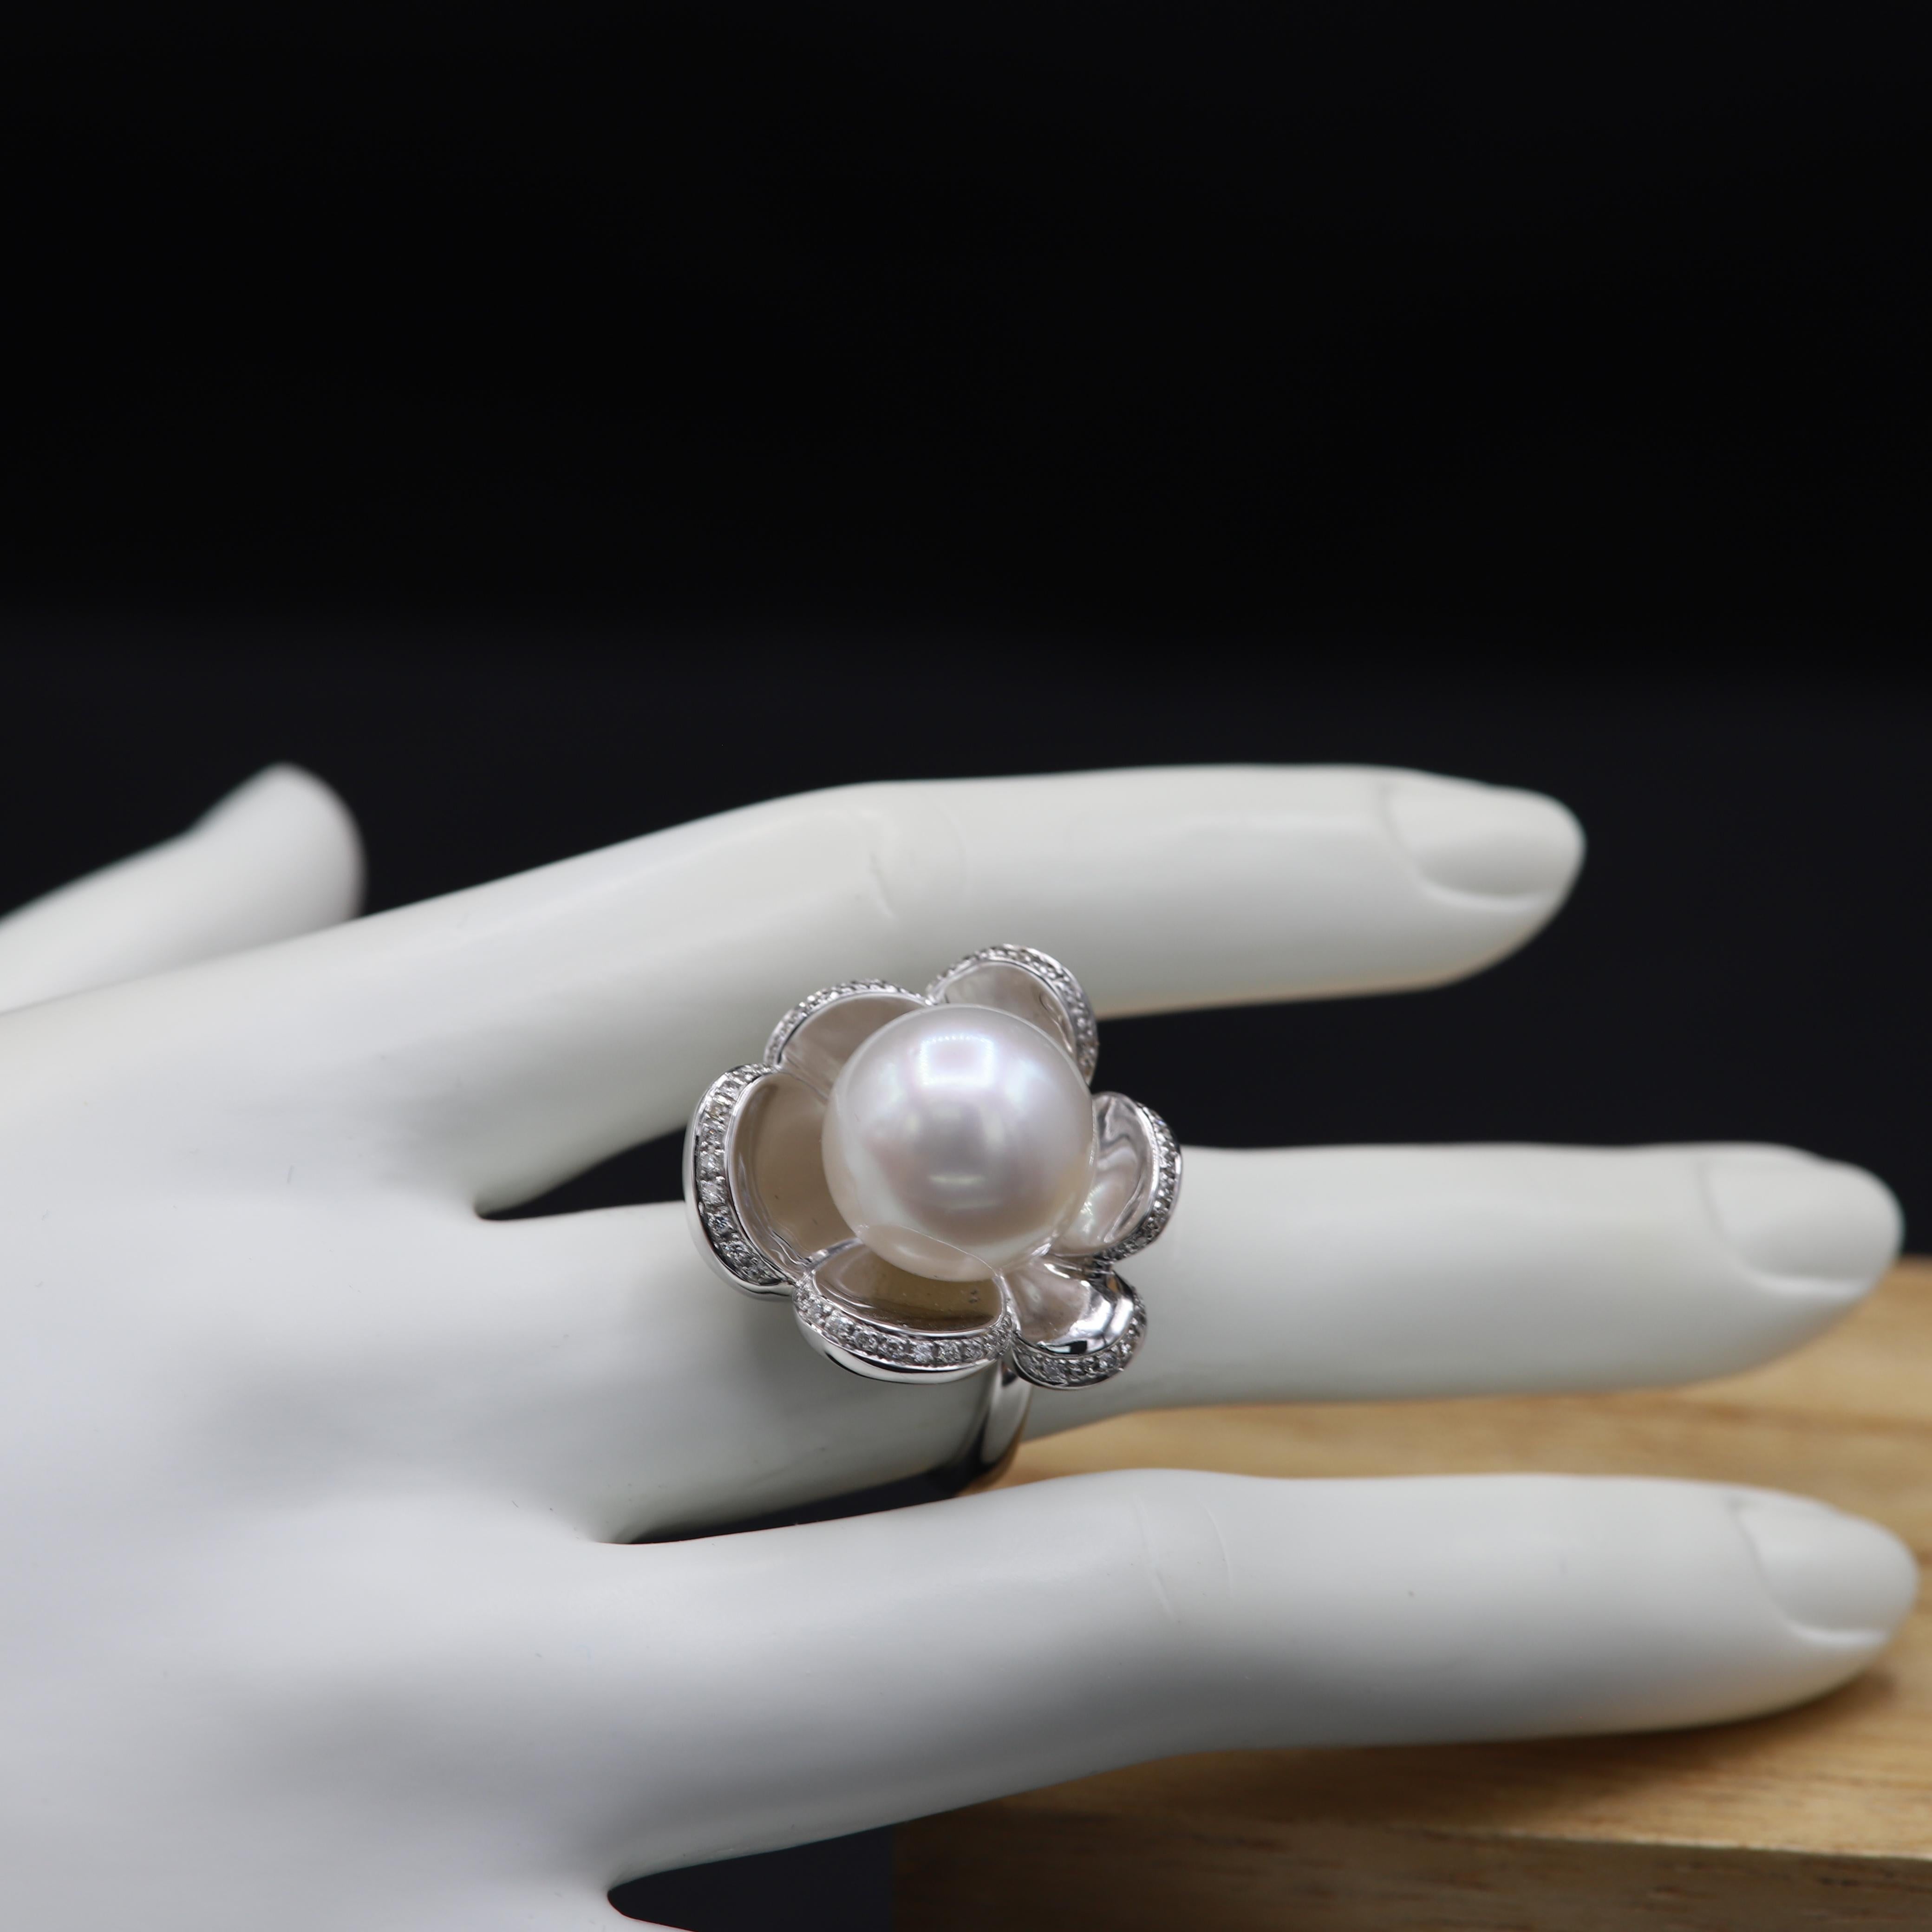 South Sea Pearl Flower Gold Ring 18 Karat White Gold & Diamonds Pearl For Sale 5